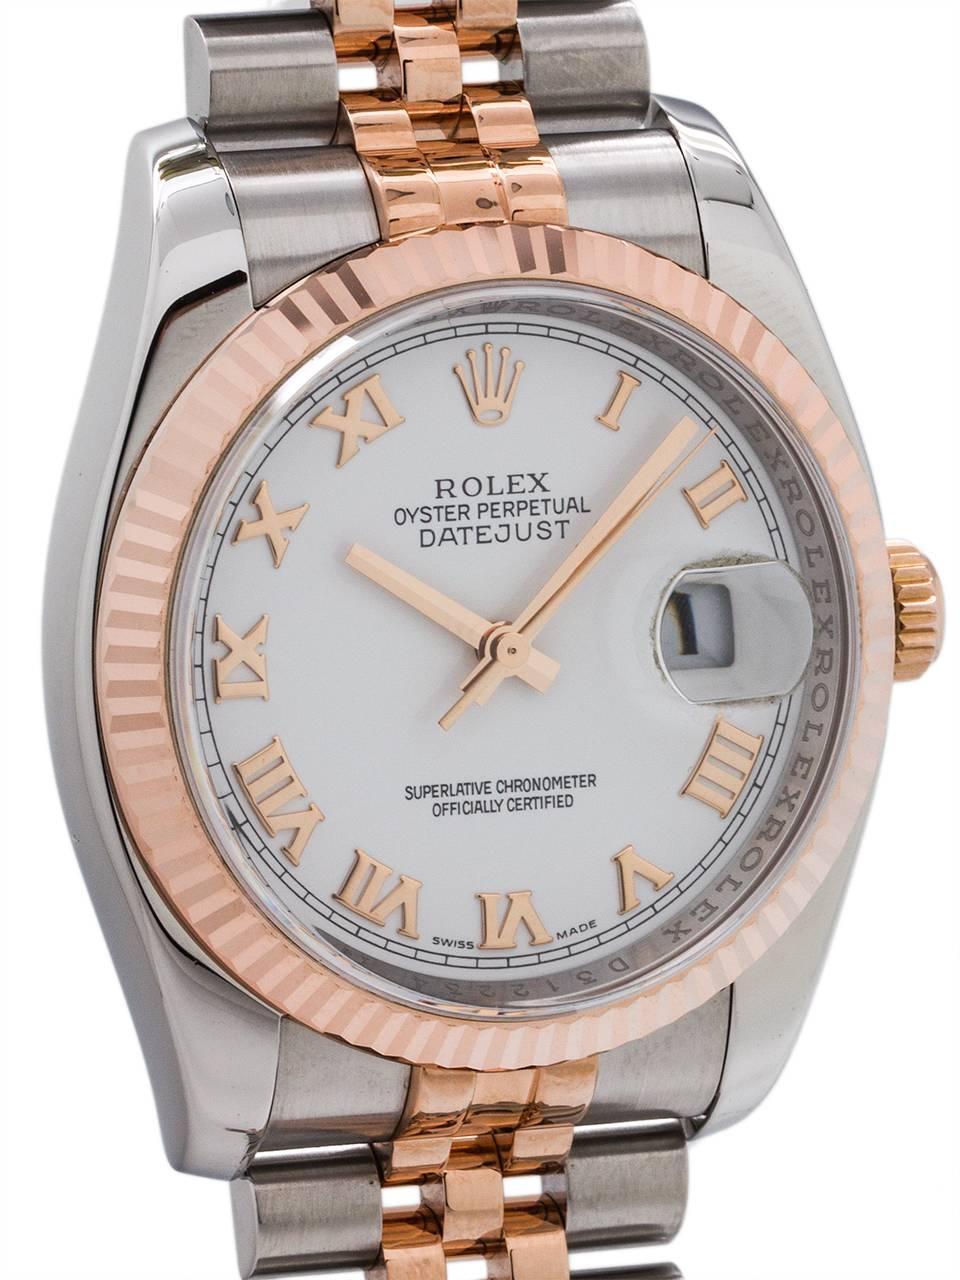 
Recent production model Rolex Datejust ref # 116231, D serial# circa 2005 in very minty preowned condition. Featuring the classic 36mm diameter, but with a modern robust case with 18K RG fluted bezel, sapphire crystal, beautiful original white dial